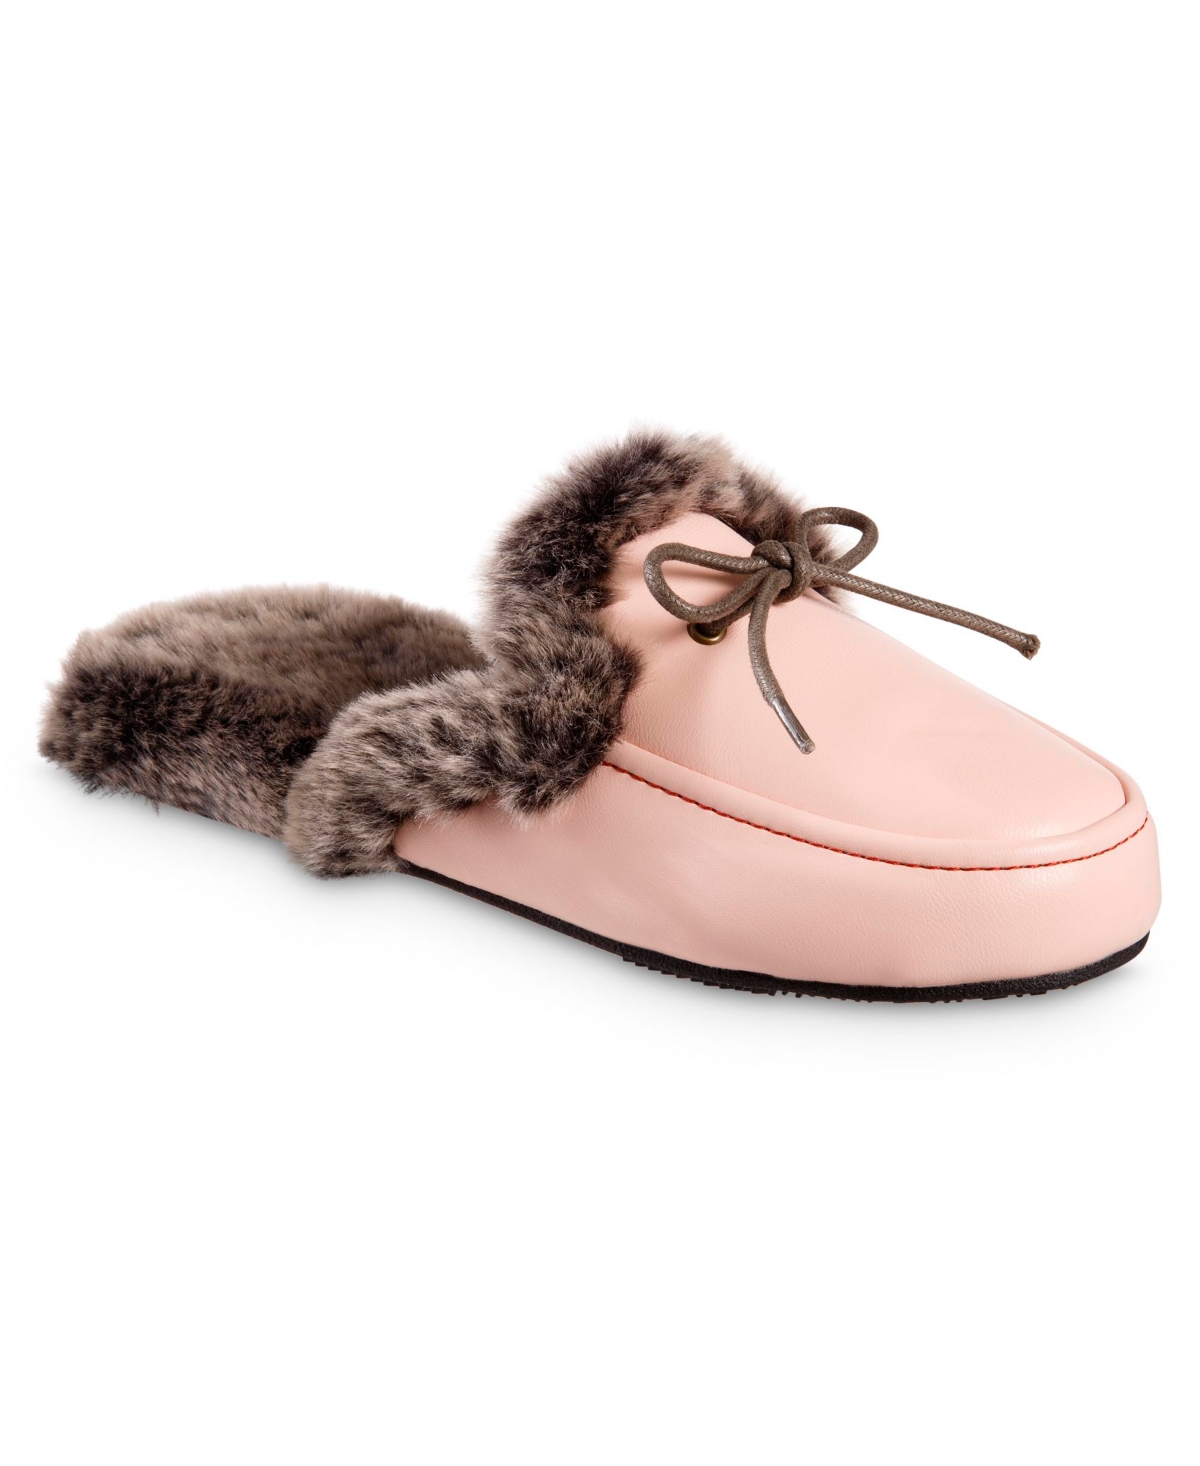 Women's Faux Leather Vivienne Scuff Slippers - Evening Sand